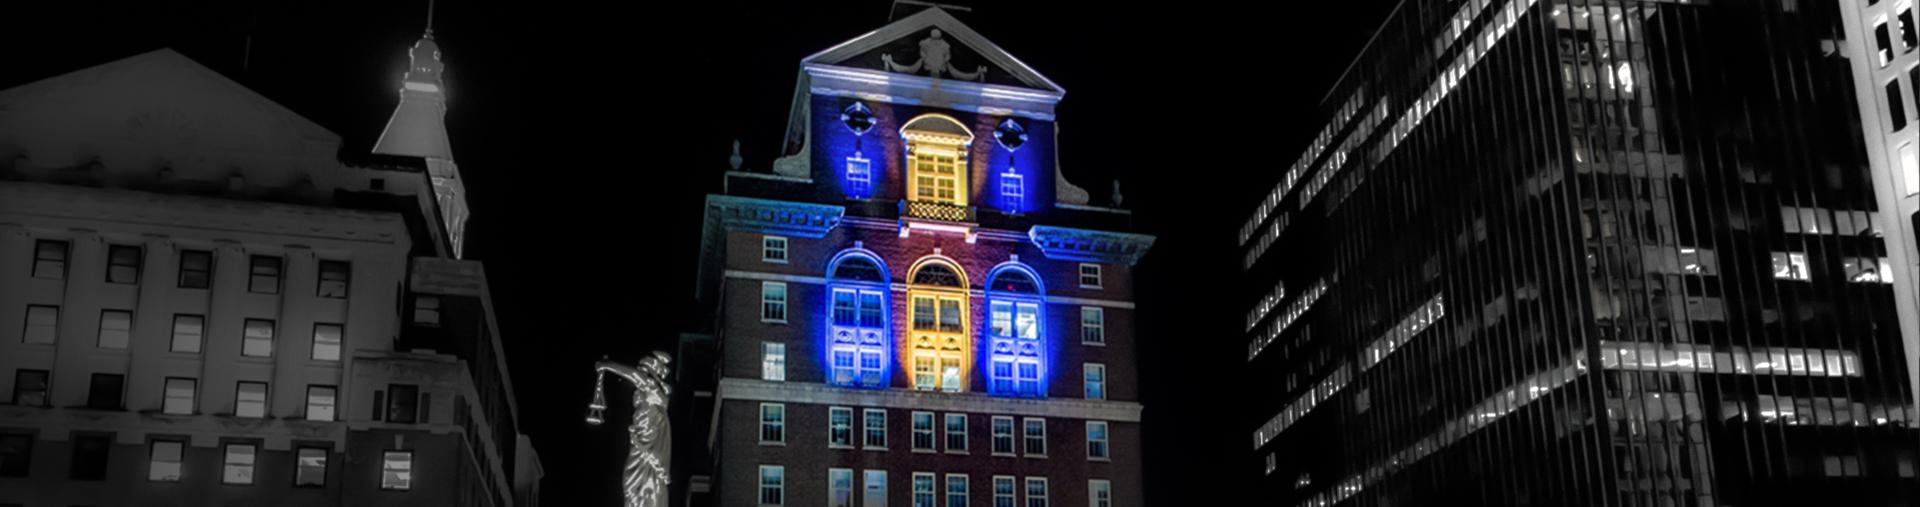 Illuminated classic Building from Aquiline Drones Office at Hartford, Connecticut, in United States